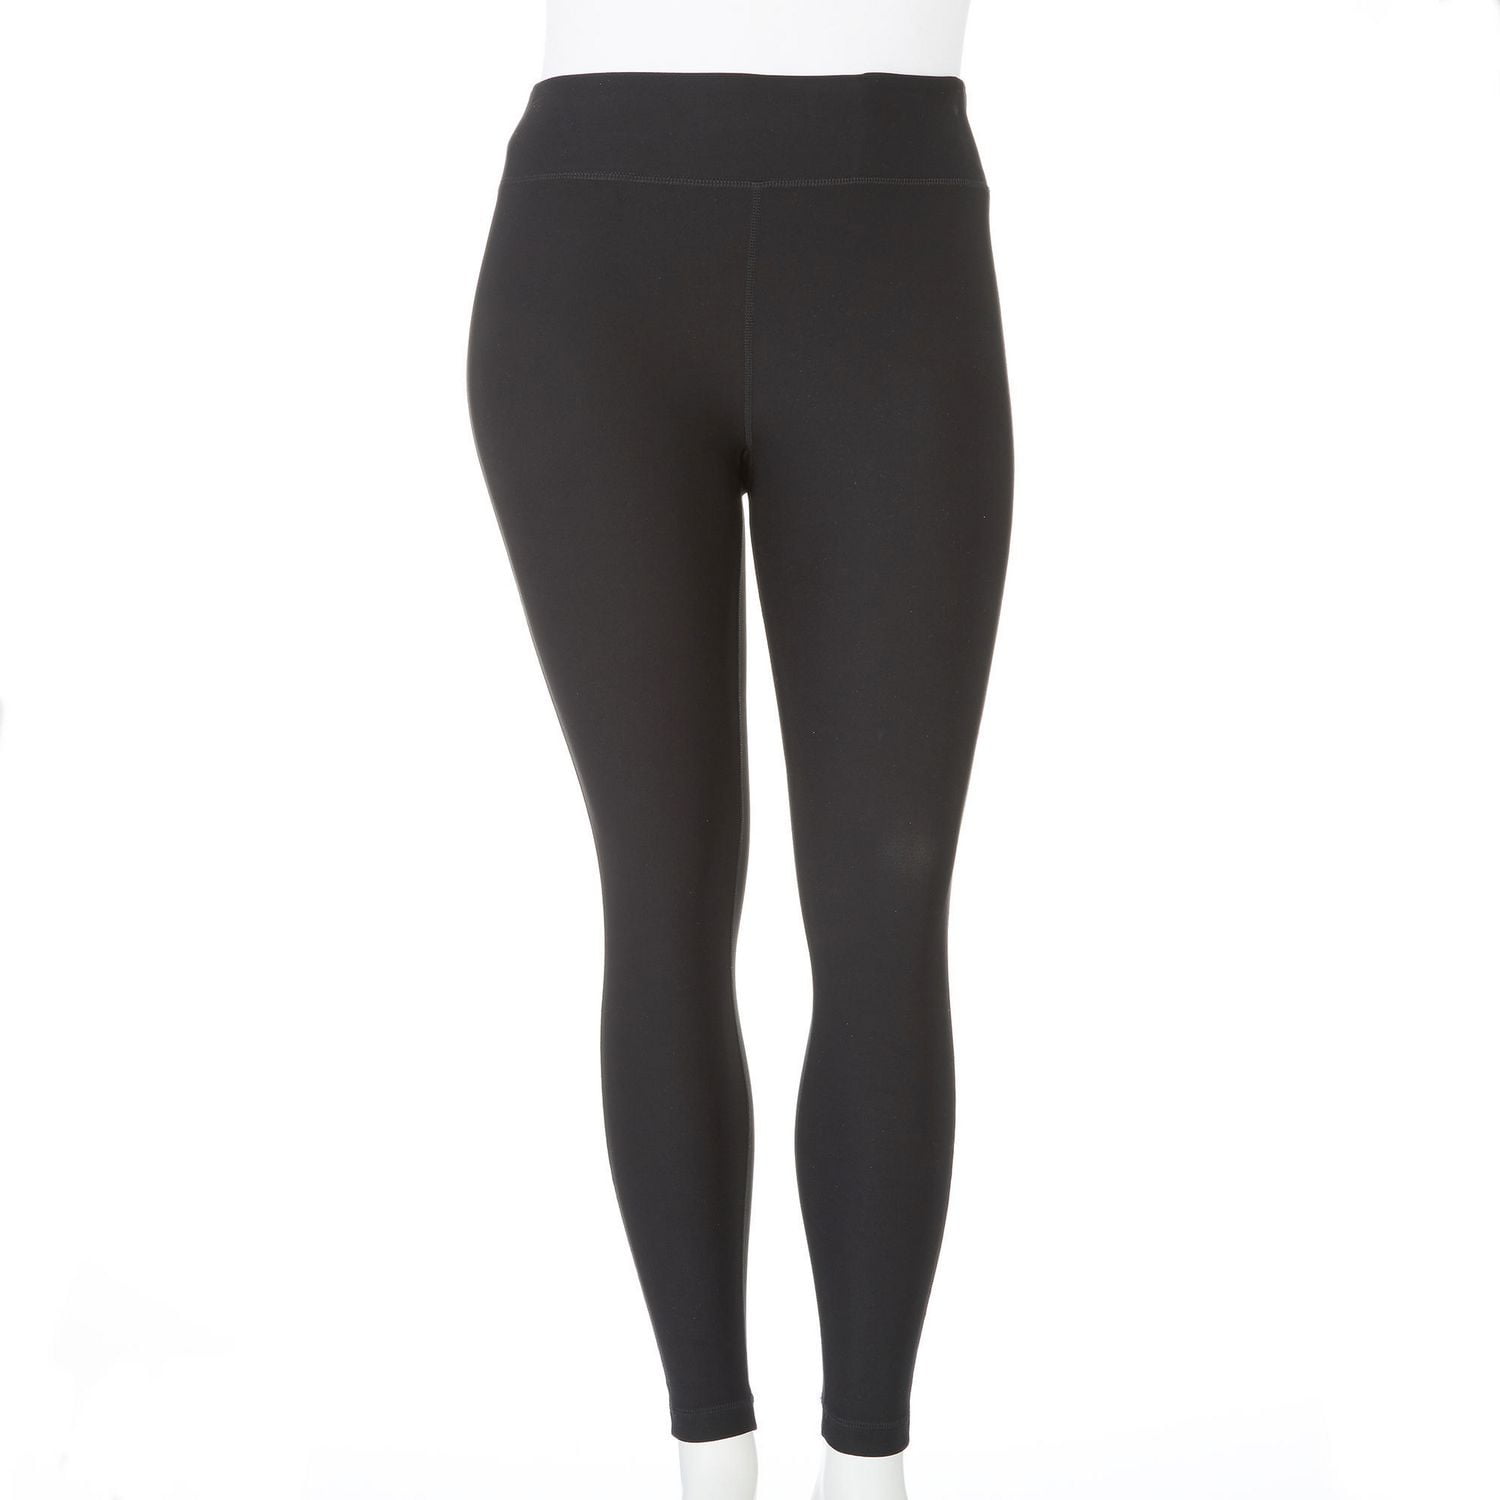 Athletic Works Compression Athletic Leggings for Women